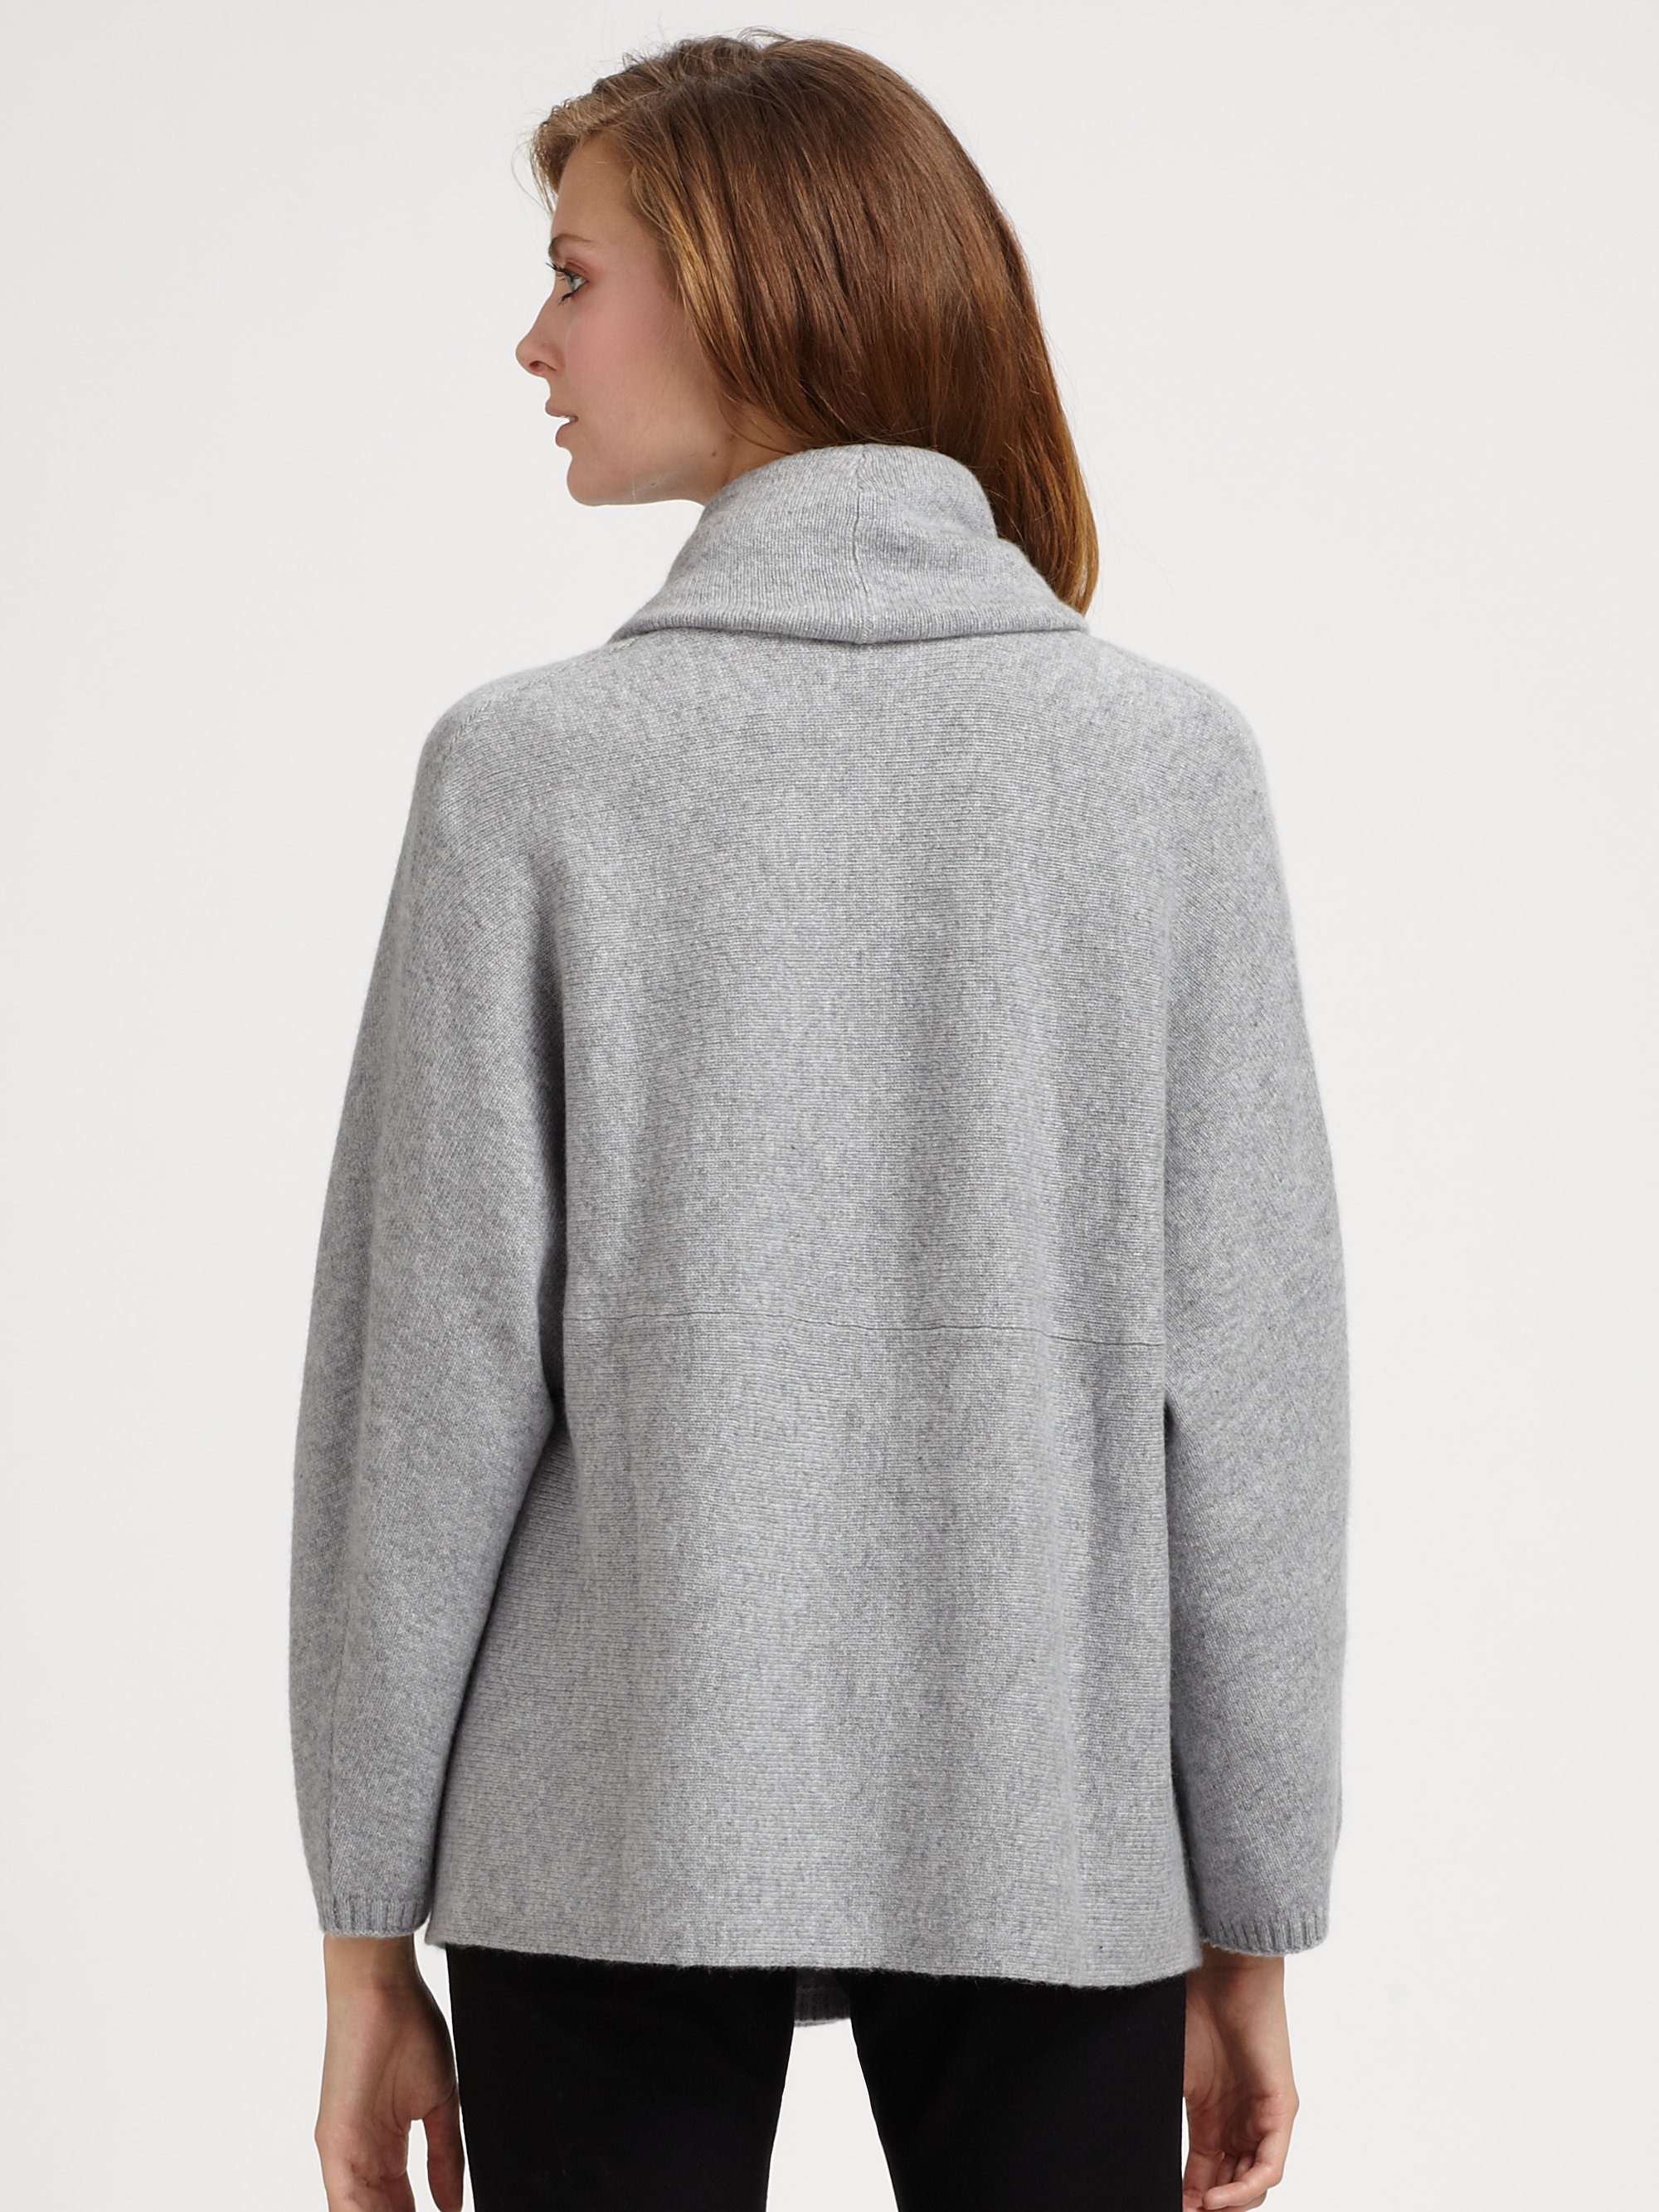 Lyst - Eileen Fisher Cashmere Wrap Cardiagn in Gray